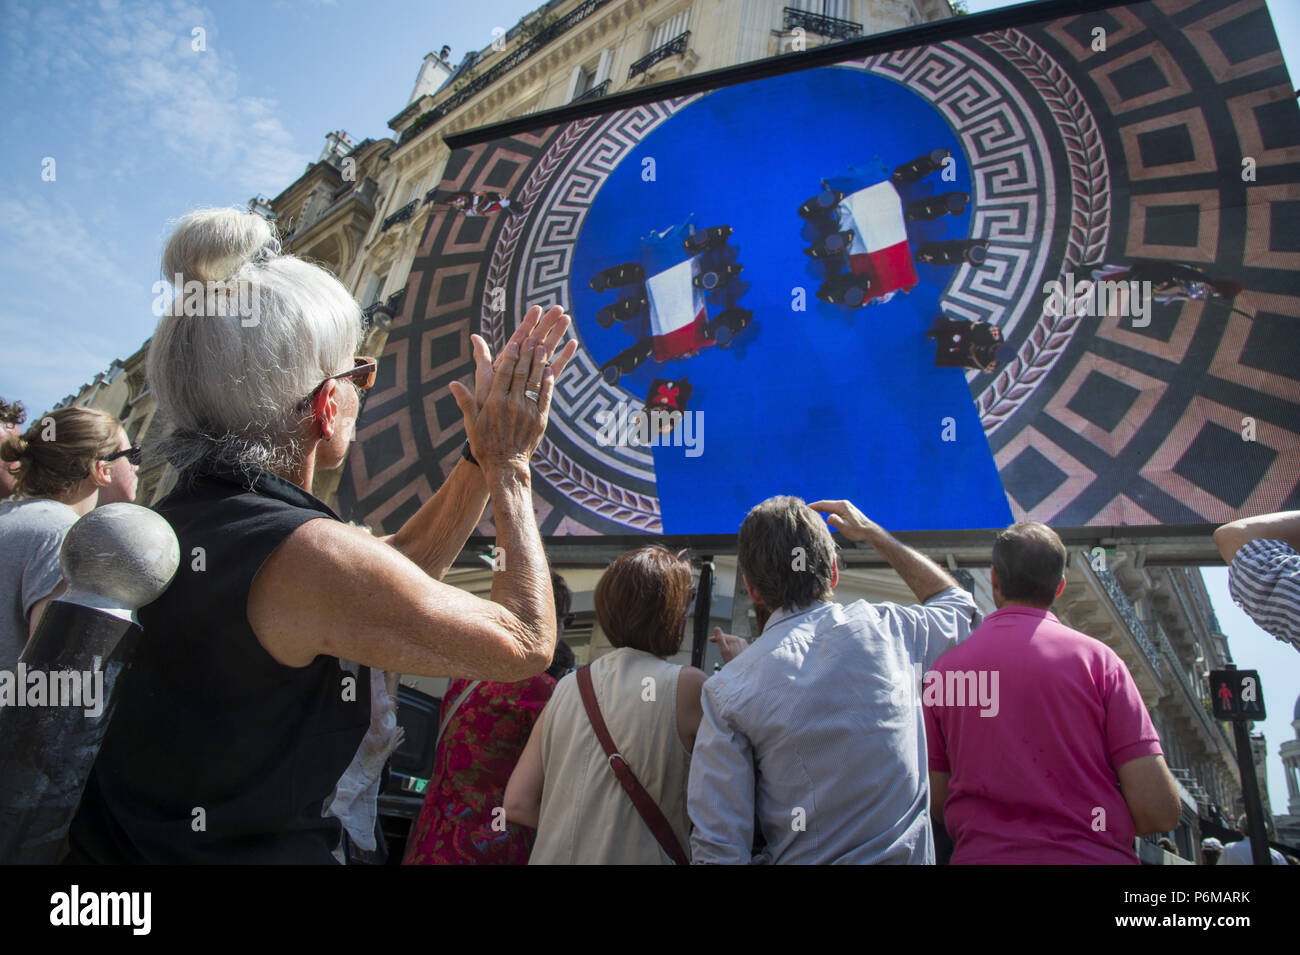 Paris, Ile de France, France. 1st July, 2018. People are seen watching the burial ceremony on a huge screen.Burial ceremony at the Pantheon of former French politician and Holocaust survivor Simone Veil and her husband Antoine Veil in Paris. Former Health Minister, Simone Veil, who passed away on June 30, 2017 became president of the European Parliament and one of France's most revered politicians by advocating the 1975 law legalizing abortion in France. Credit: Thierry Le Fouille/SOPA Images/ZUMA Wire/Alamy Live News Stock Photo